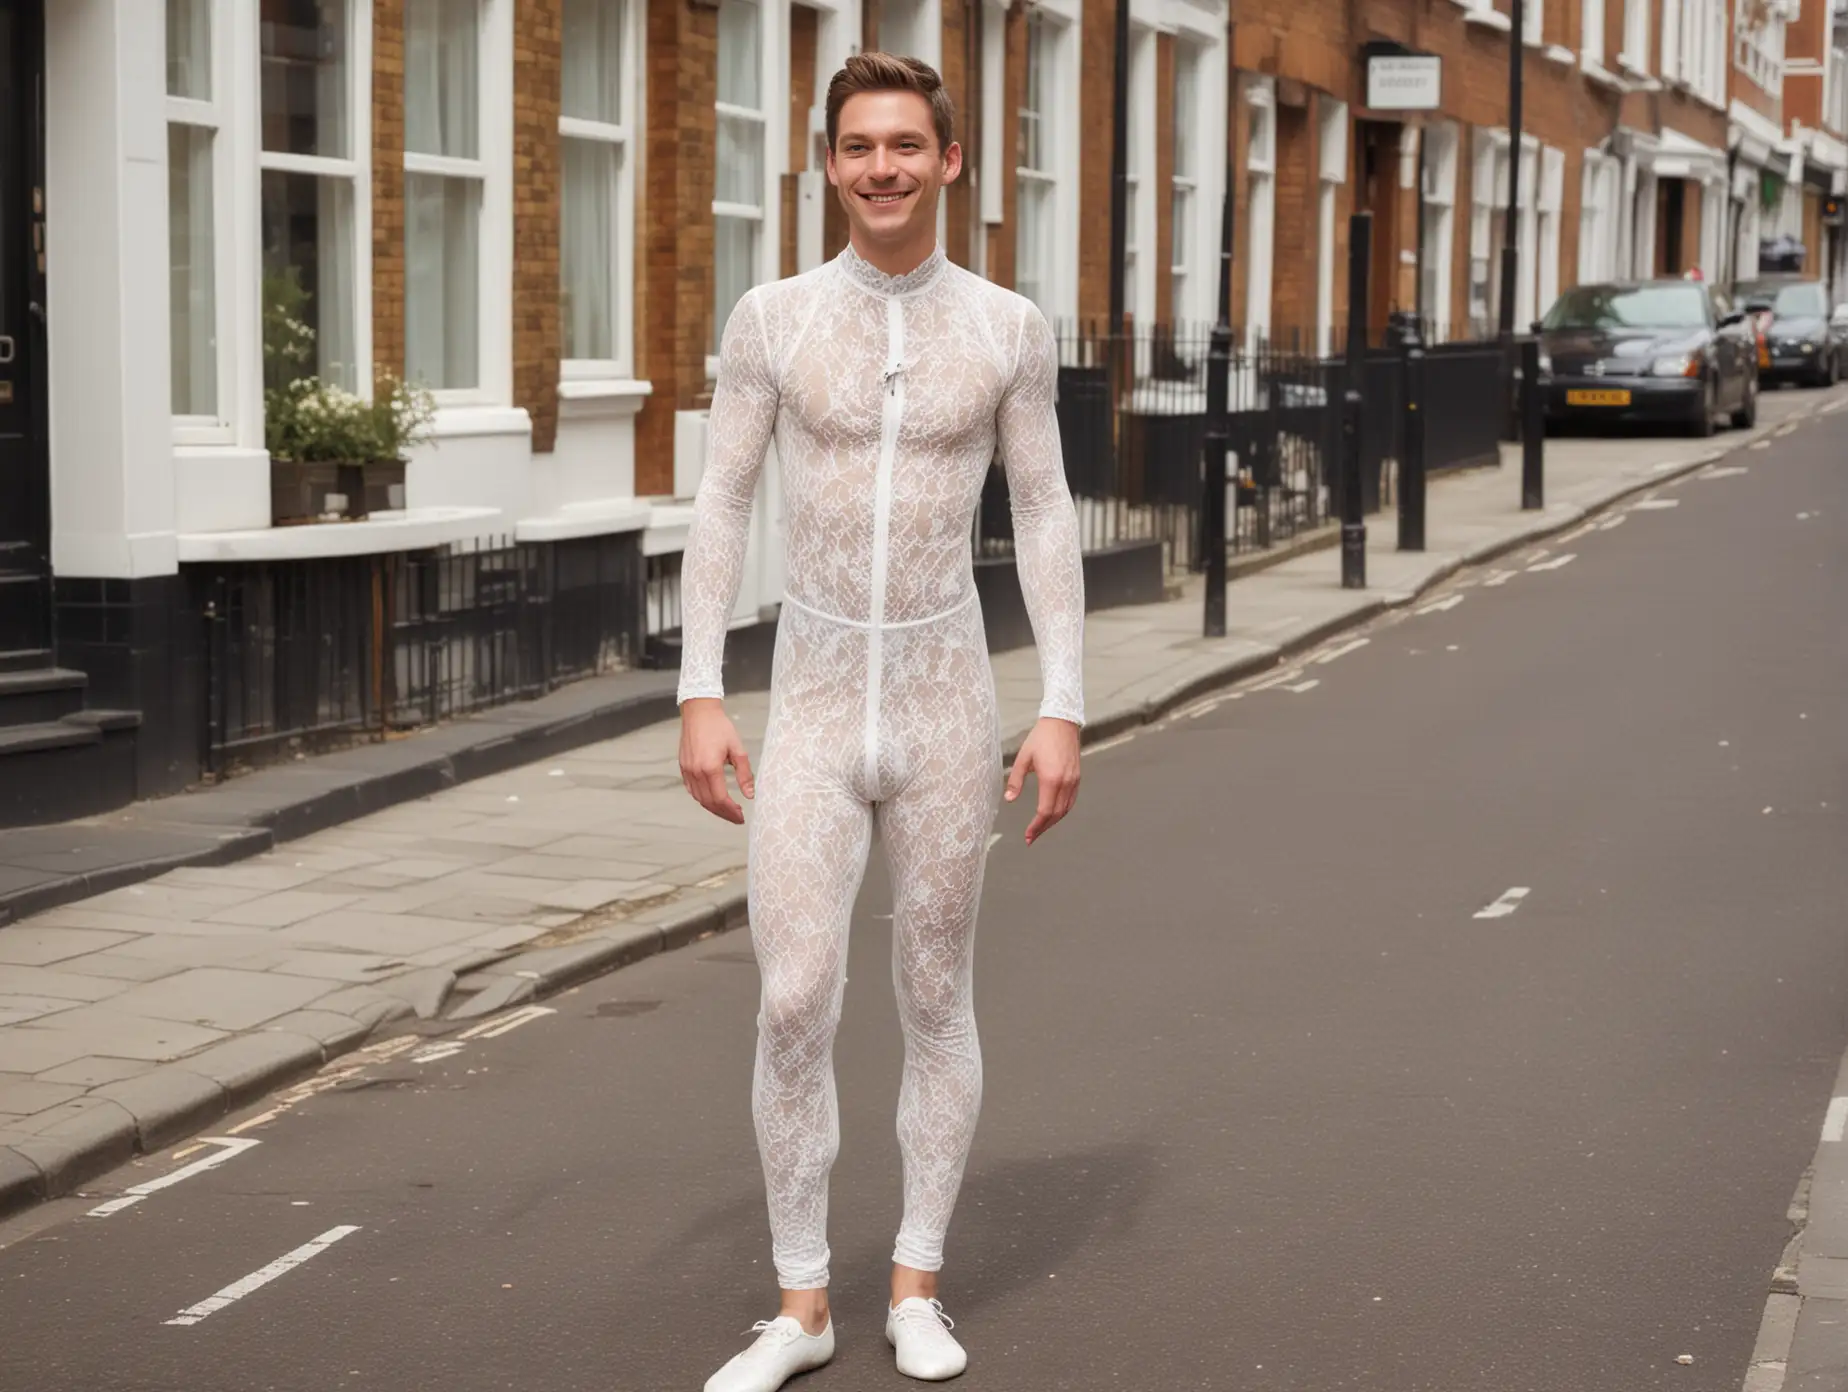 30 year old boy in skin-tight white lace catsuit.  white ballet shoes.  smiling at camera in a London street